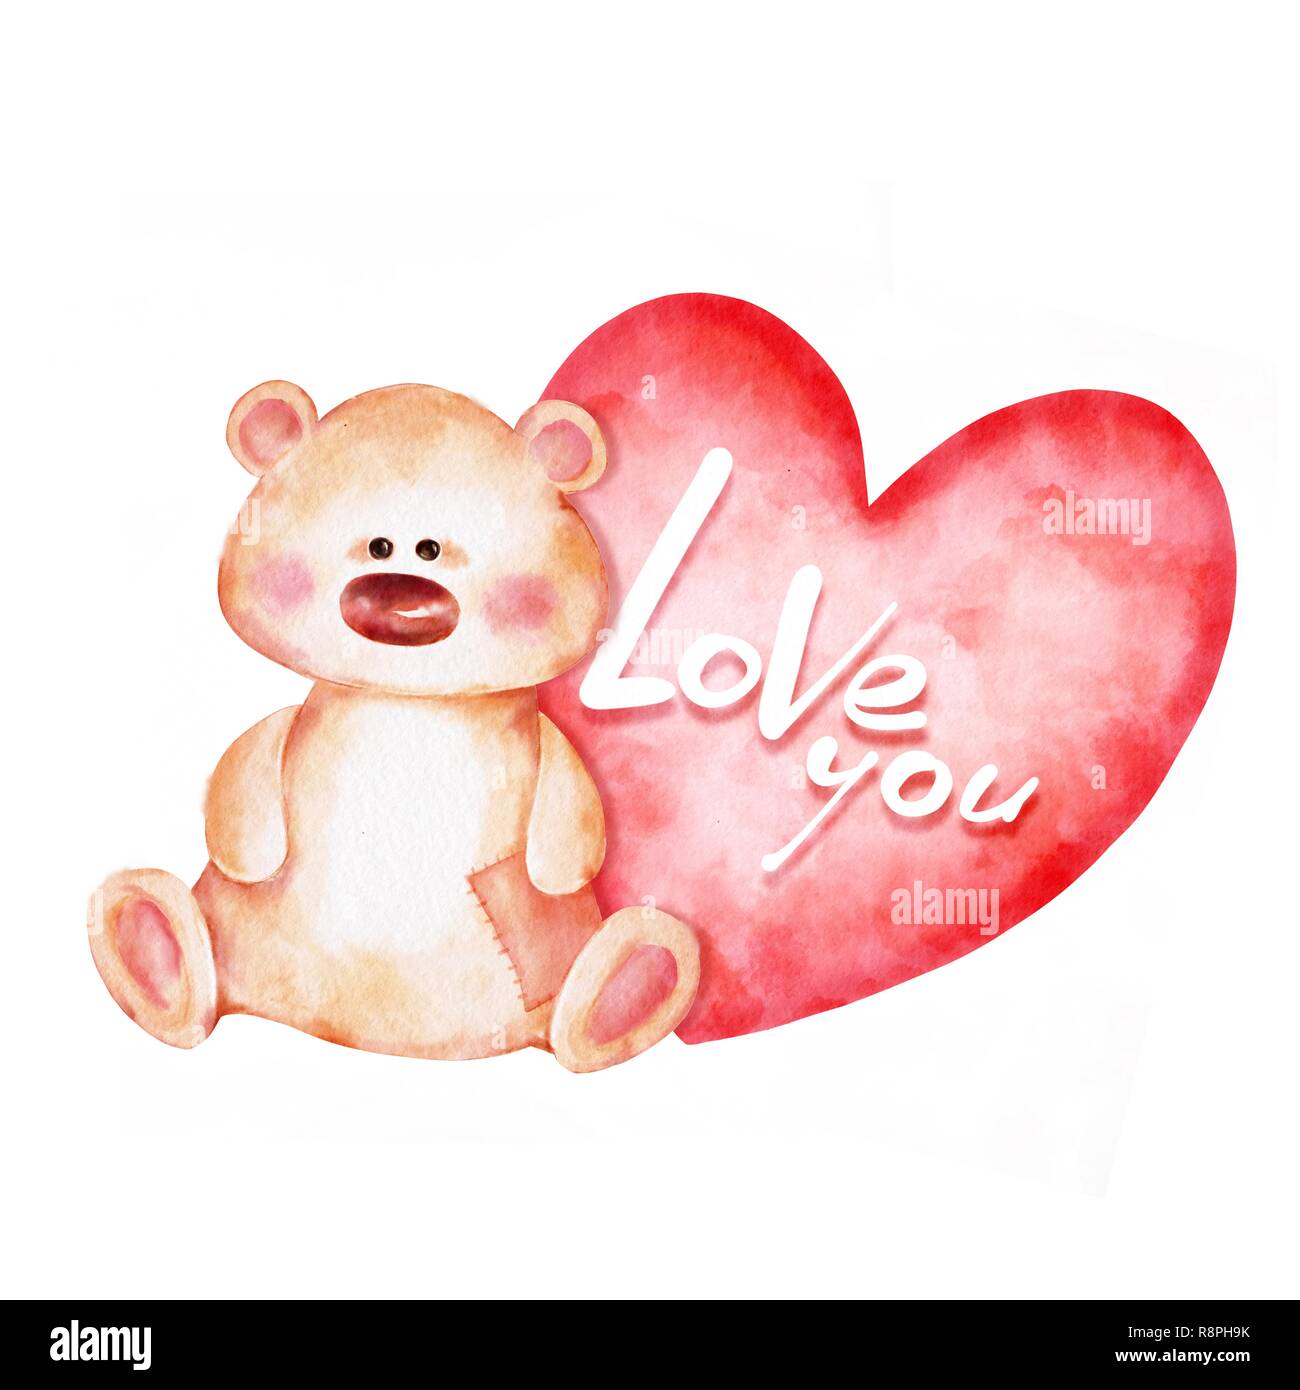 Cute teddy bear and red heart. Watercolor Stock Photo